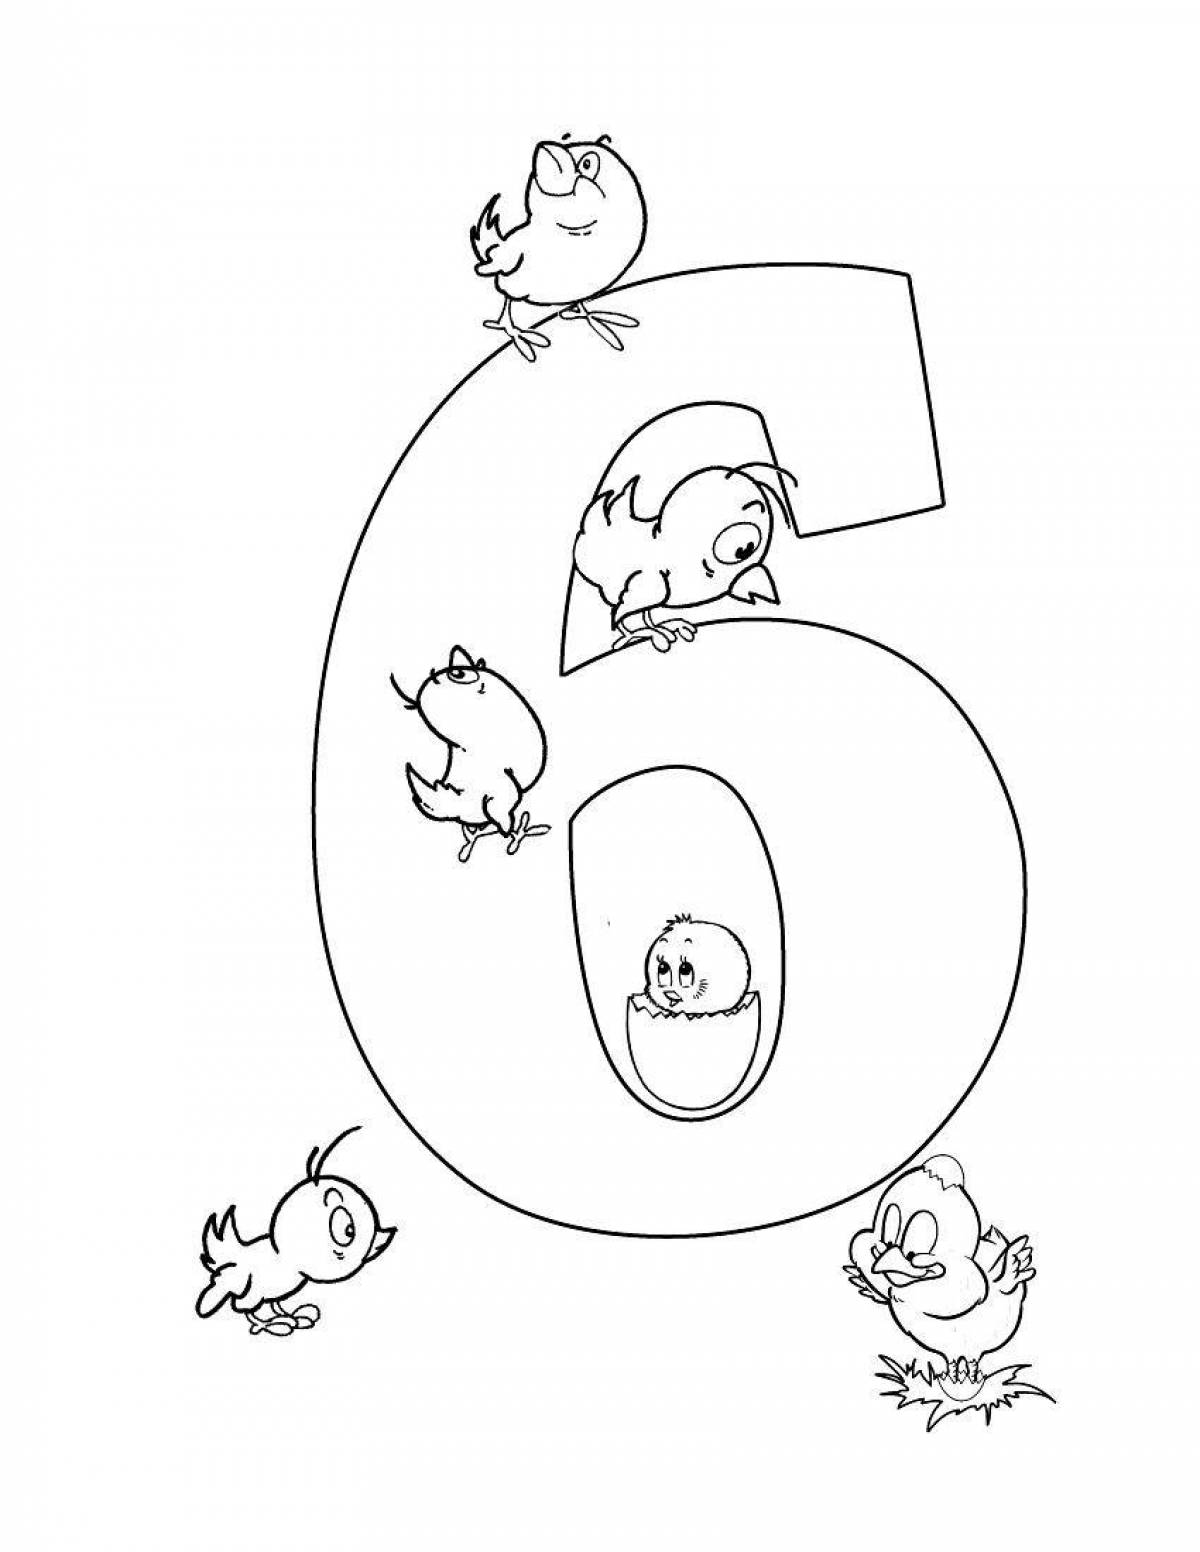 Shine coloring page 6